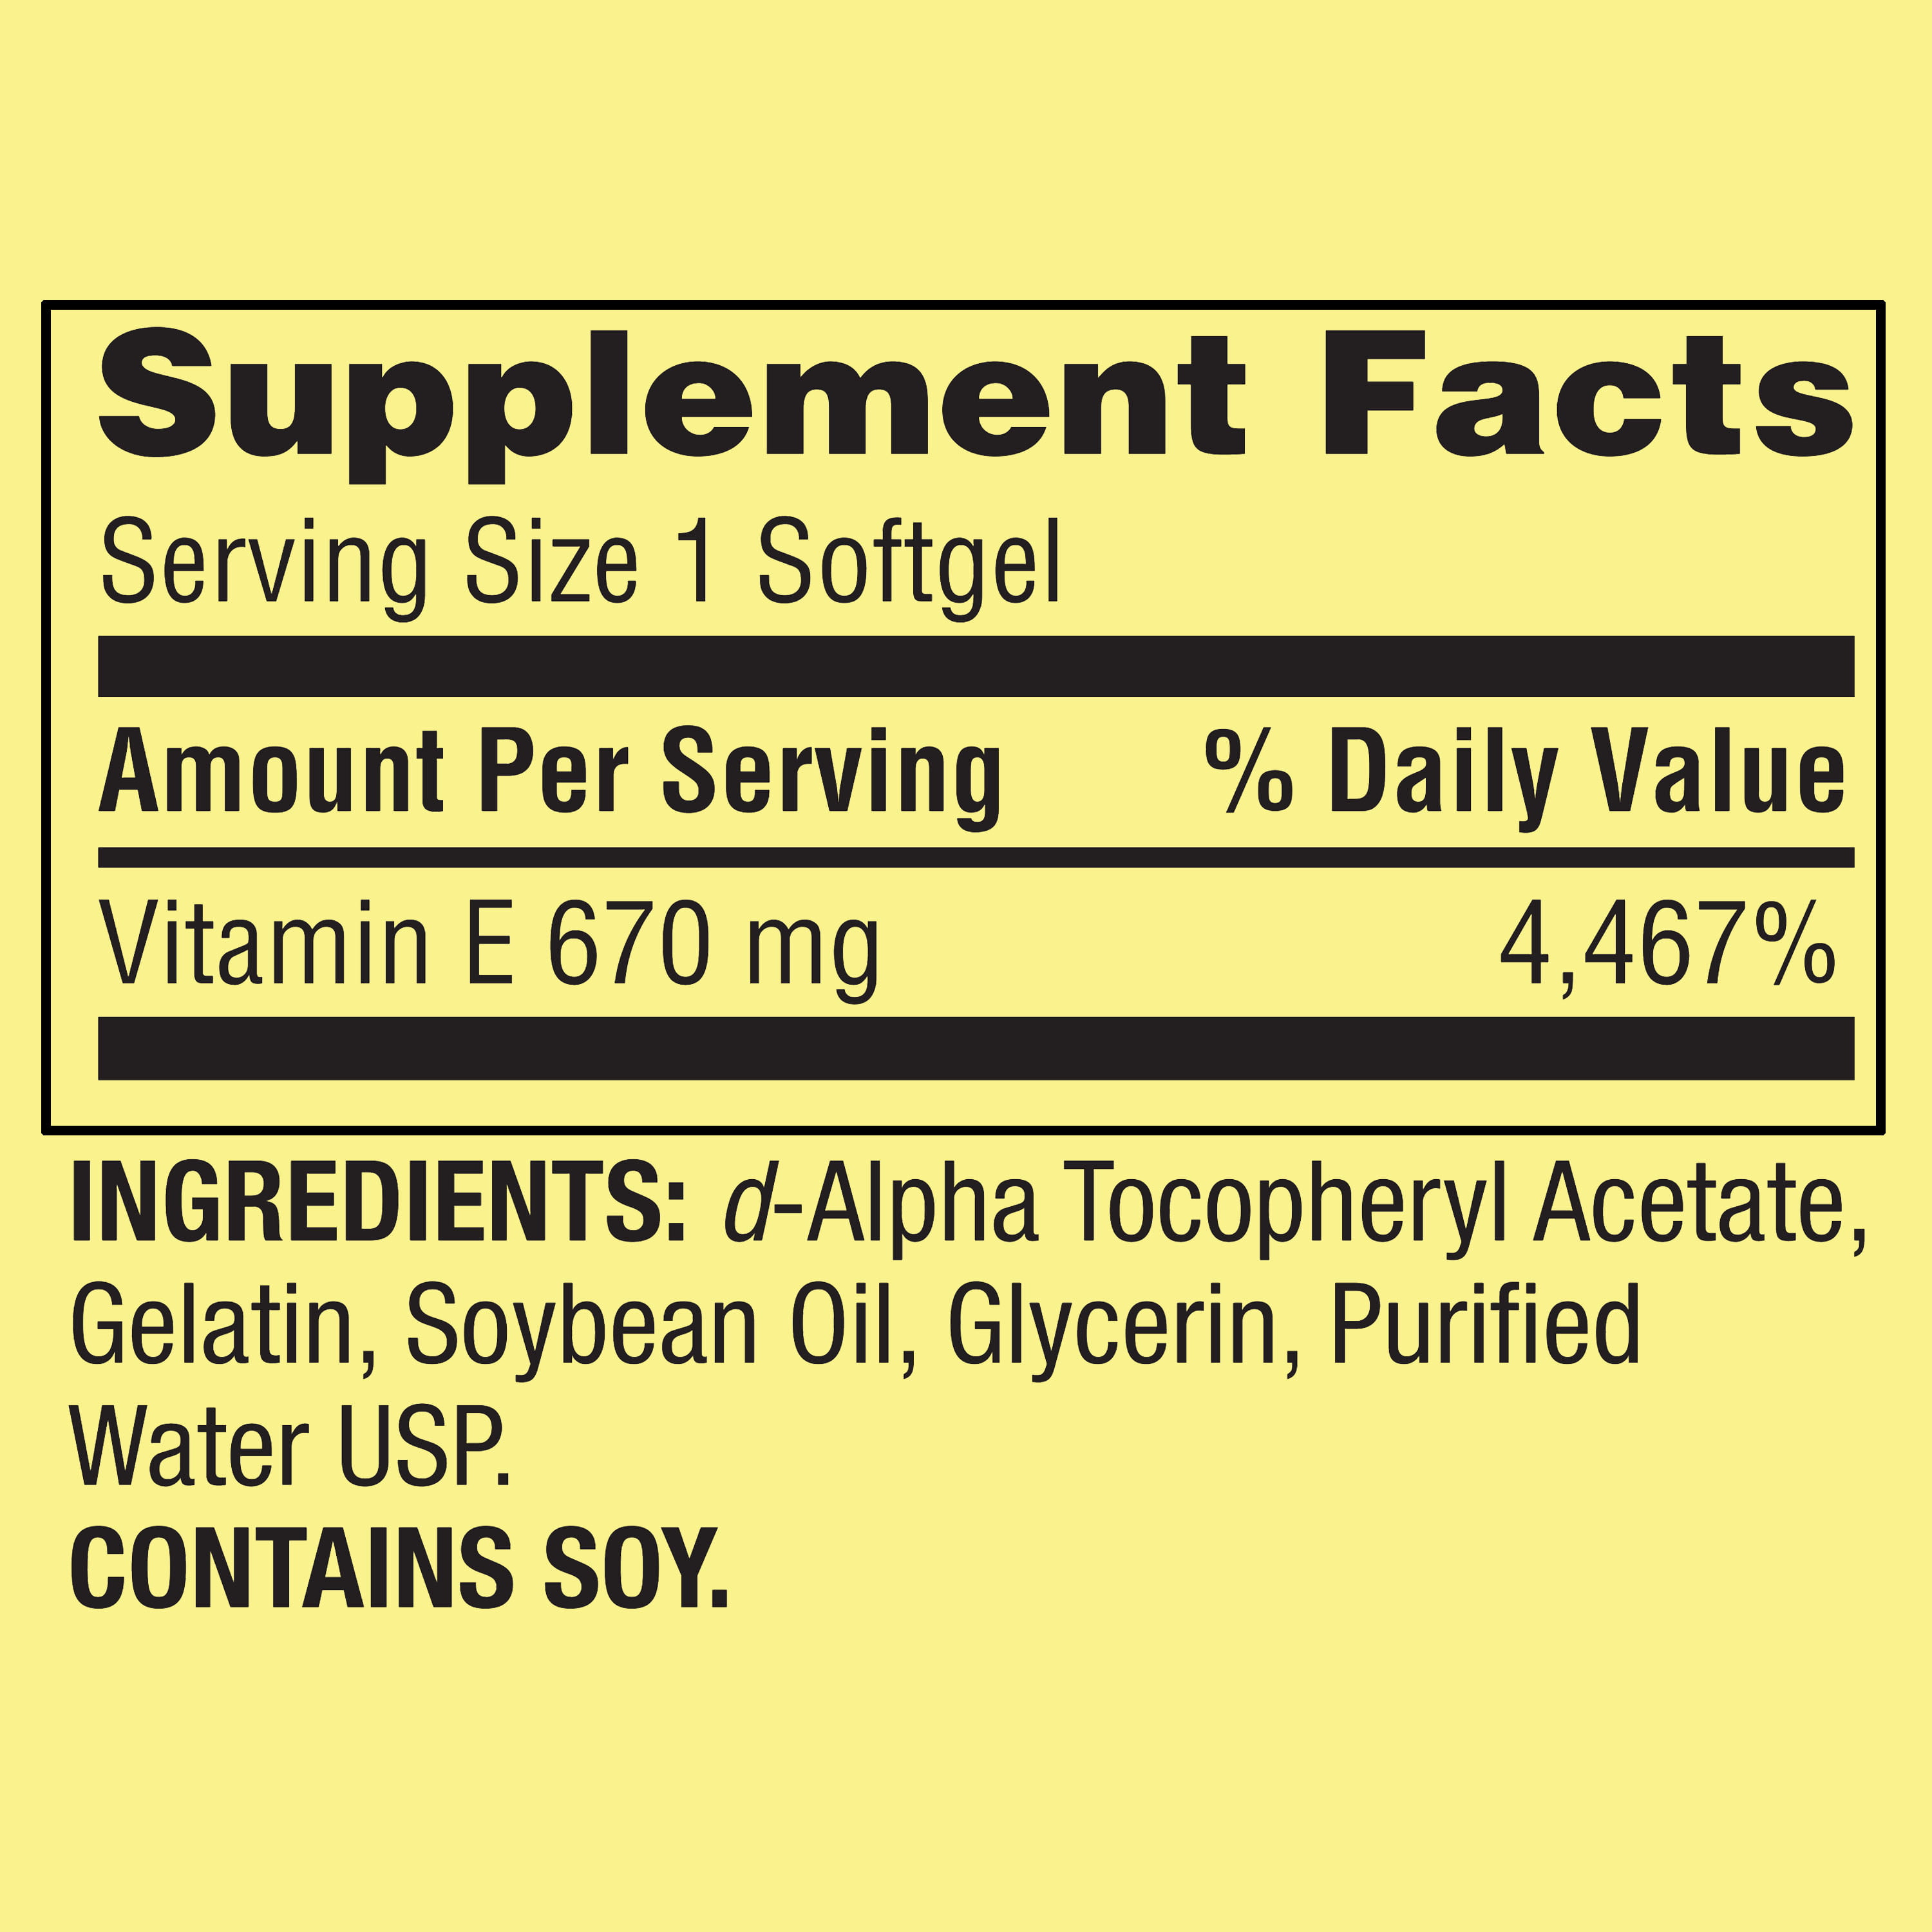 Extra Strength Vitamin E Supplement, 60ct